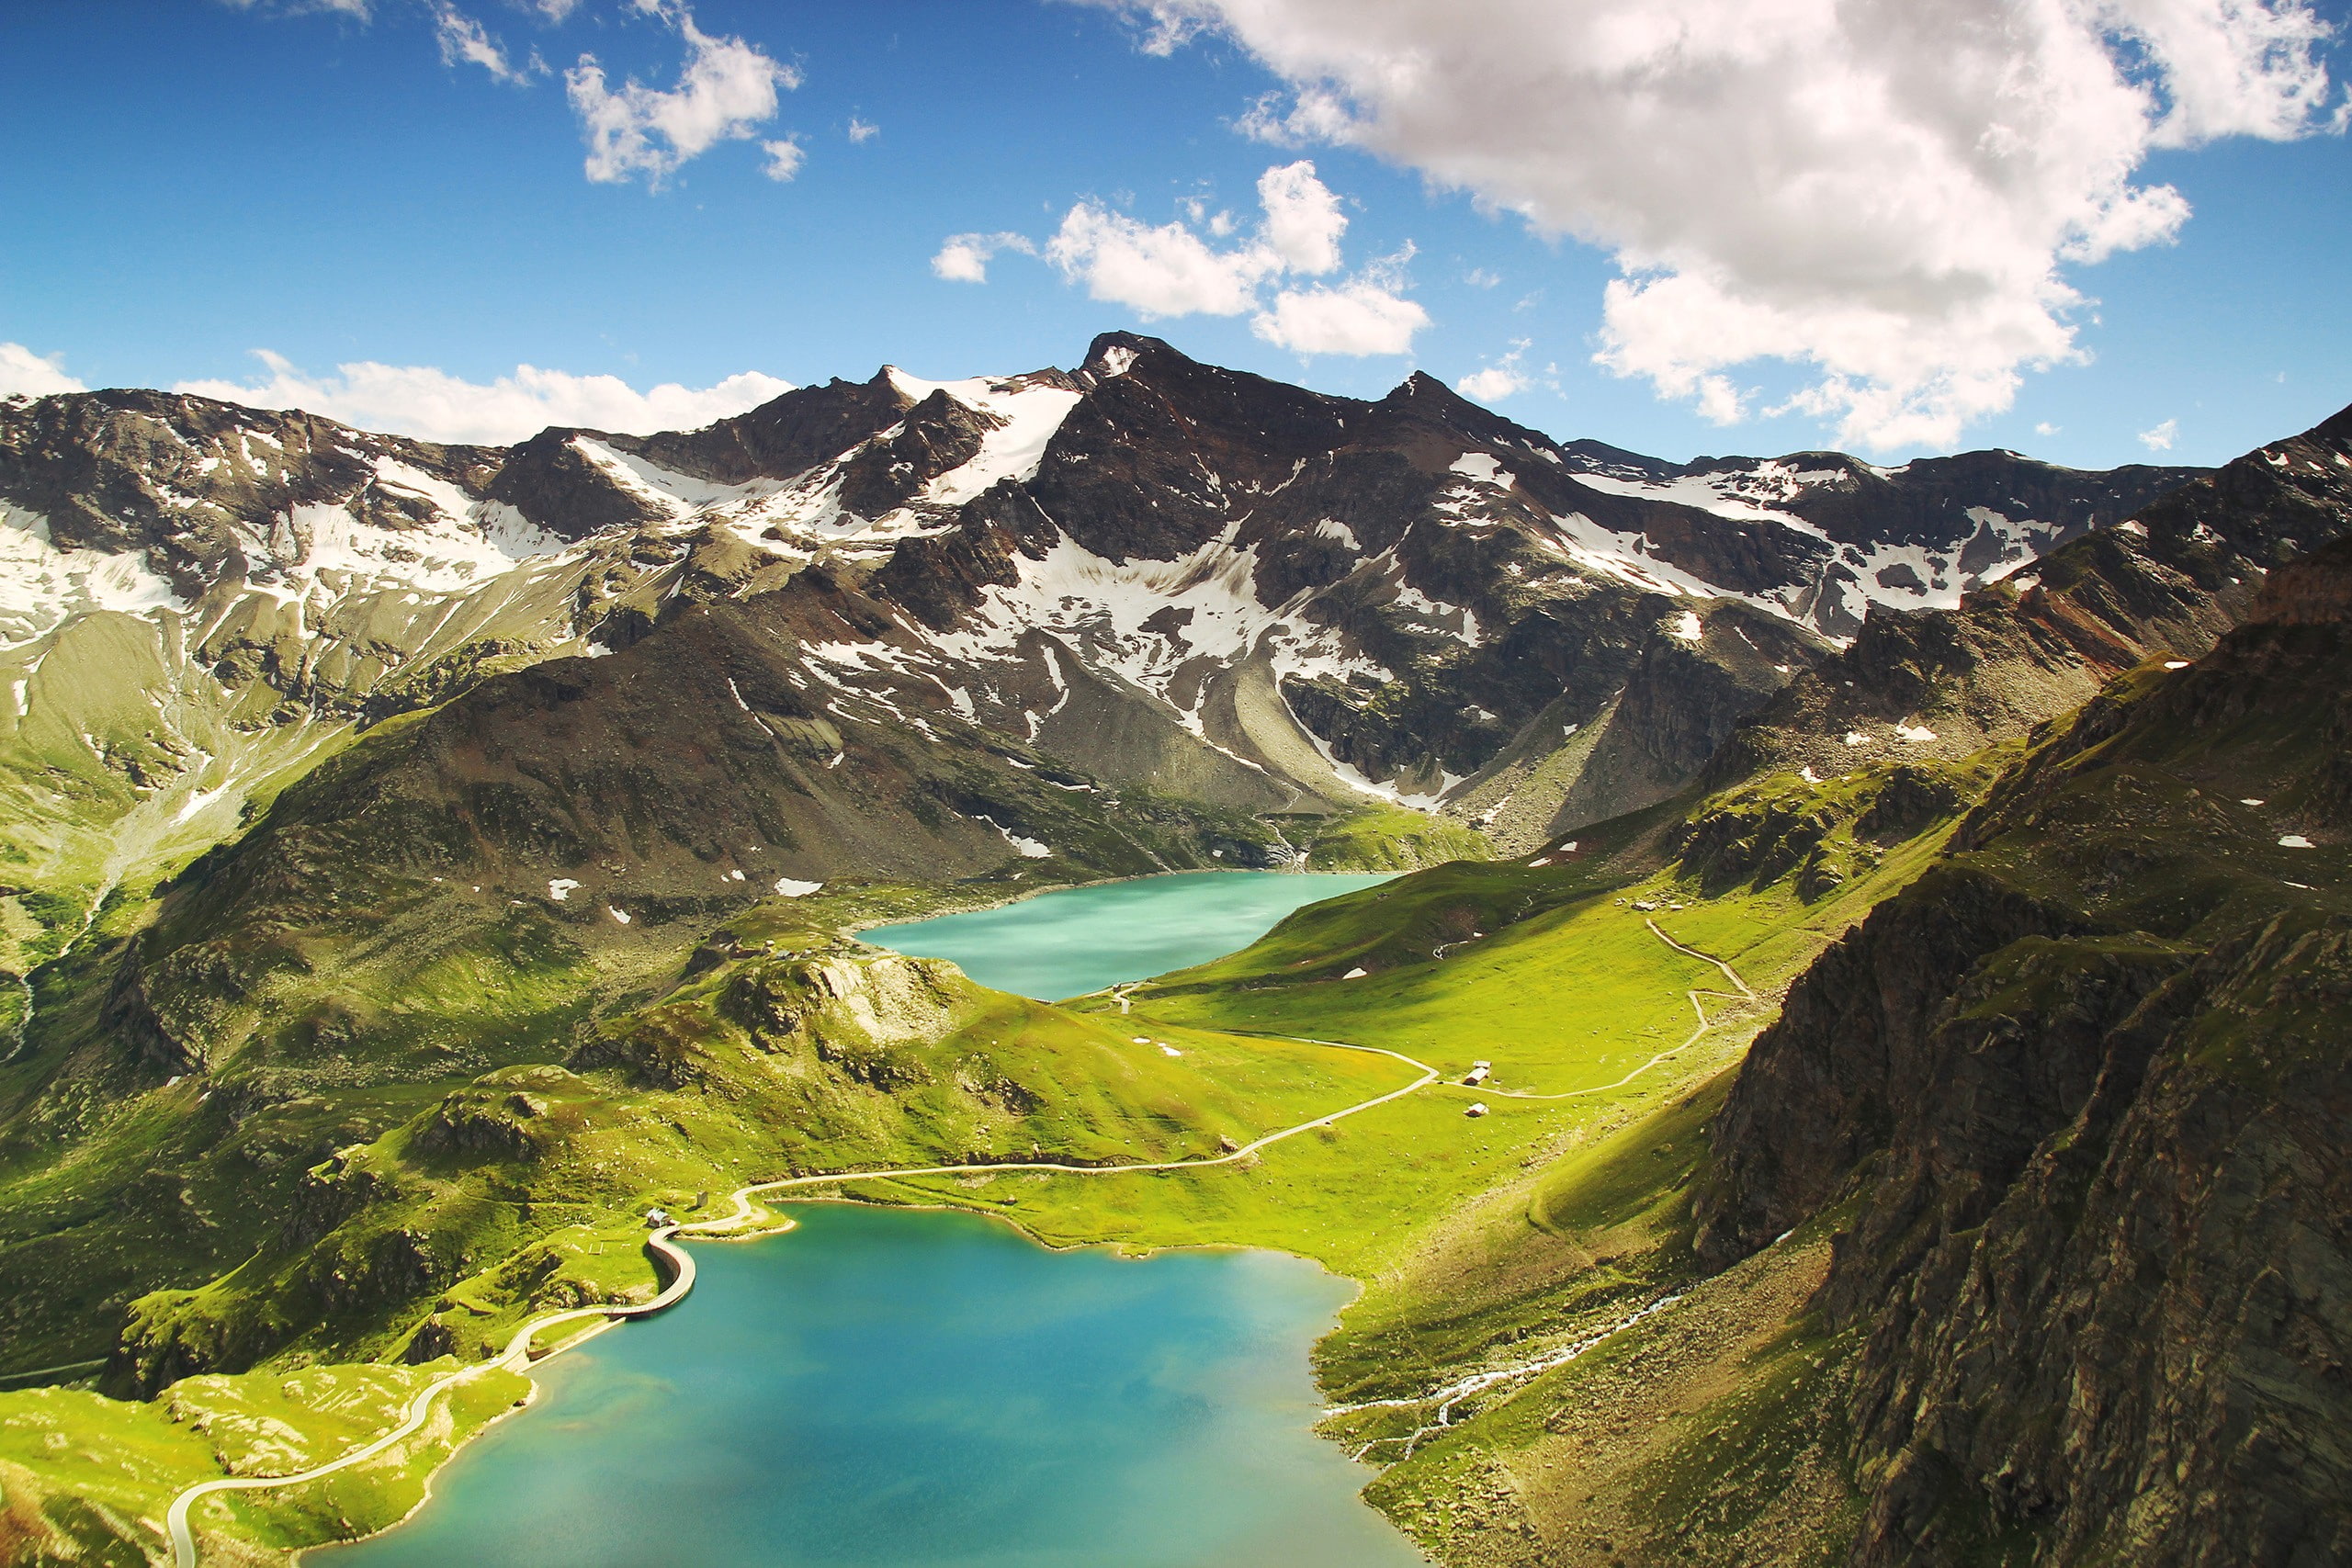 Agnel Lake, Ceresole Reale, Mountains, Italy